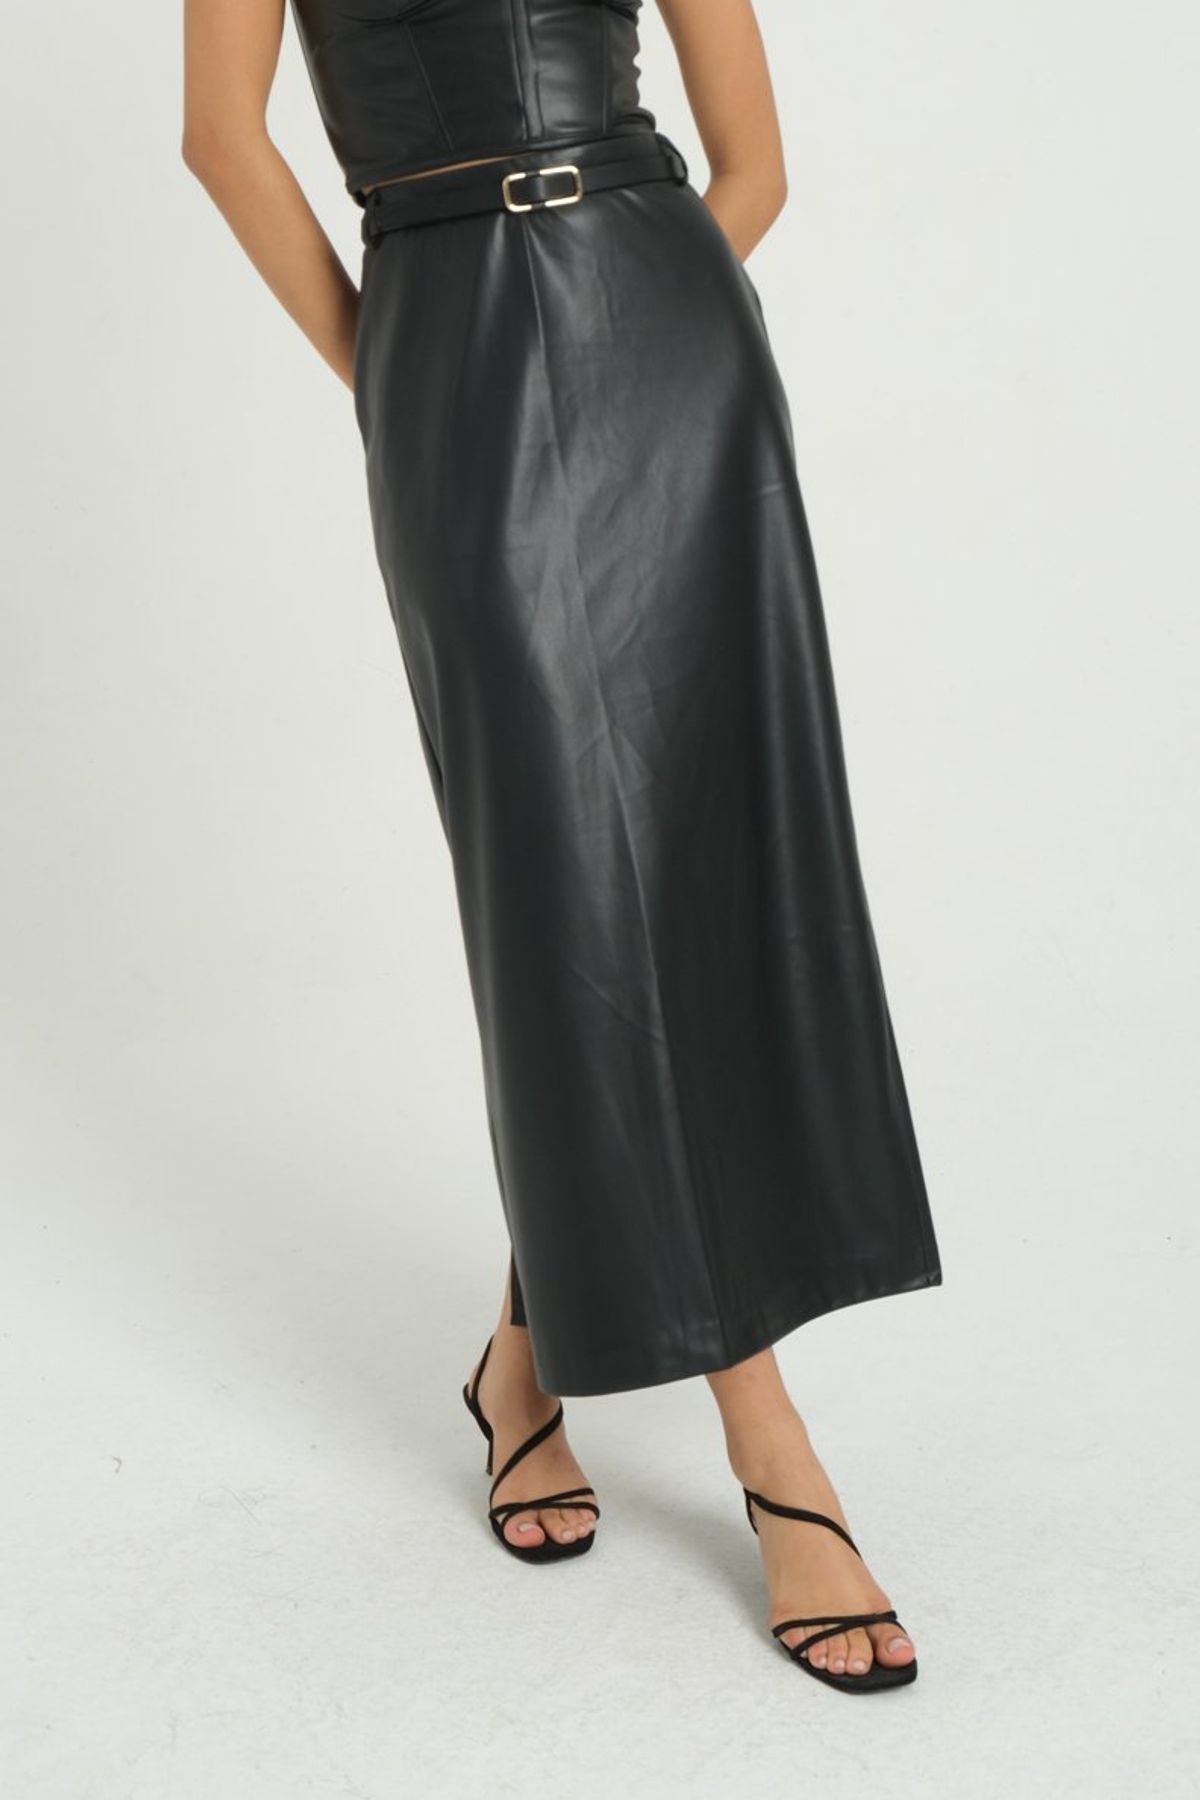 Faux Leather Mid Rise Maxi Skirt with a Belt